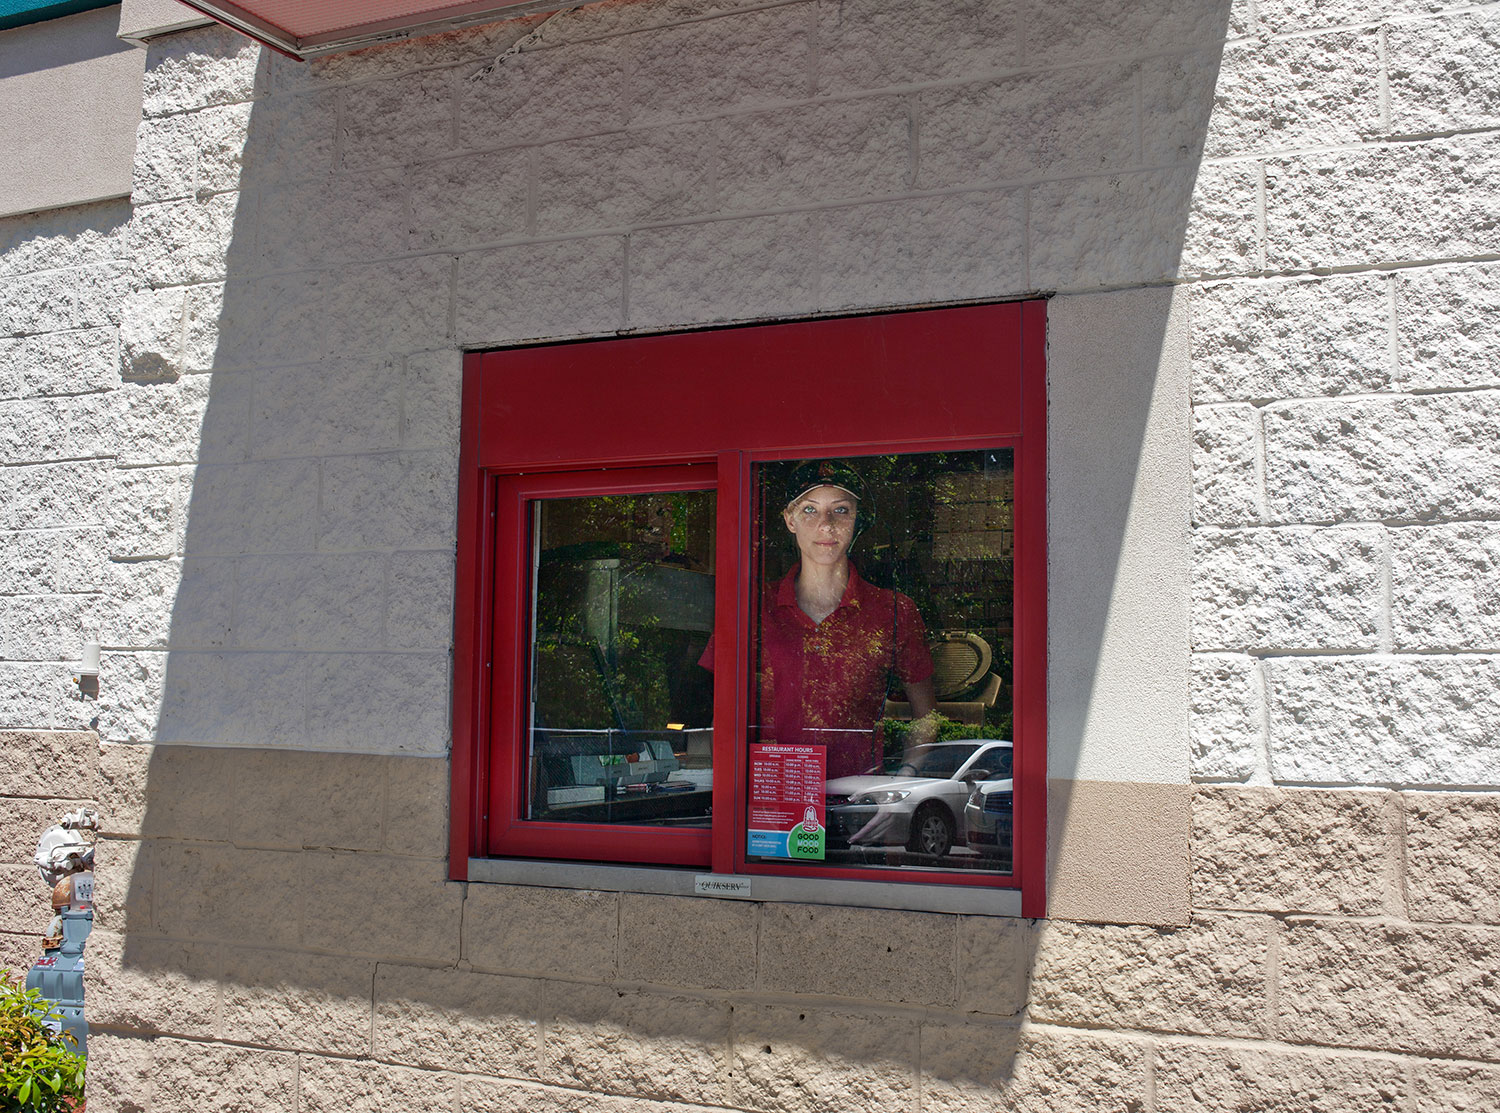   Arby's Girl. Boston Post Road, CT,  2012  Archival fiber inkjet print mounted to yellow sintra  20 x 30 inches    